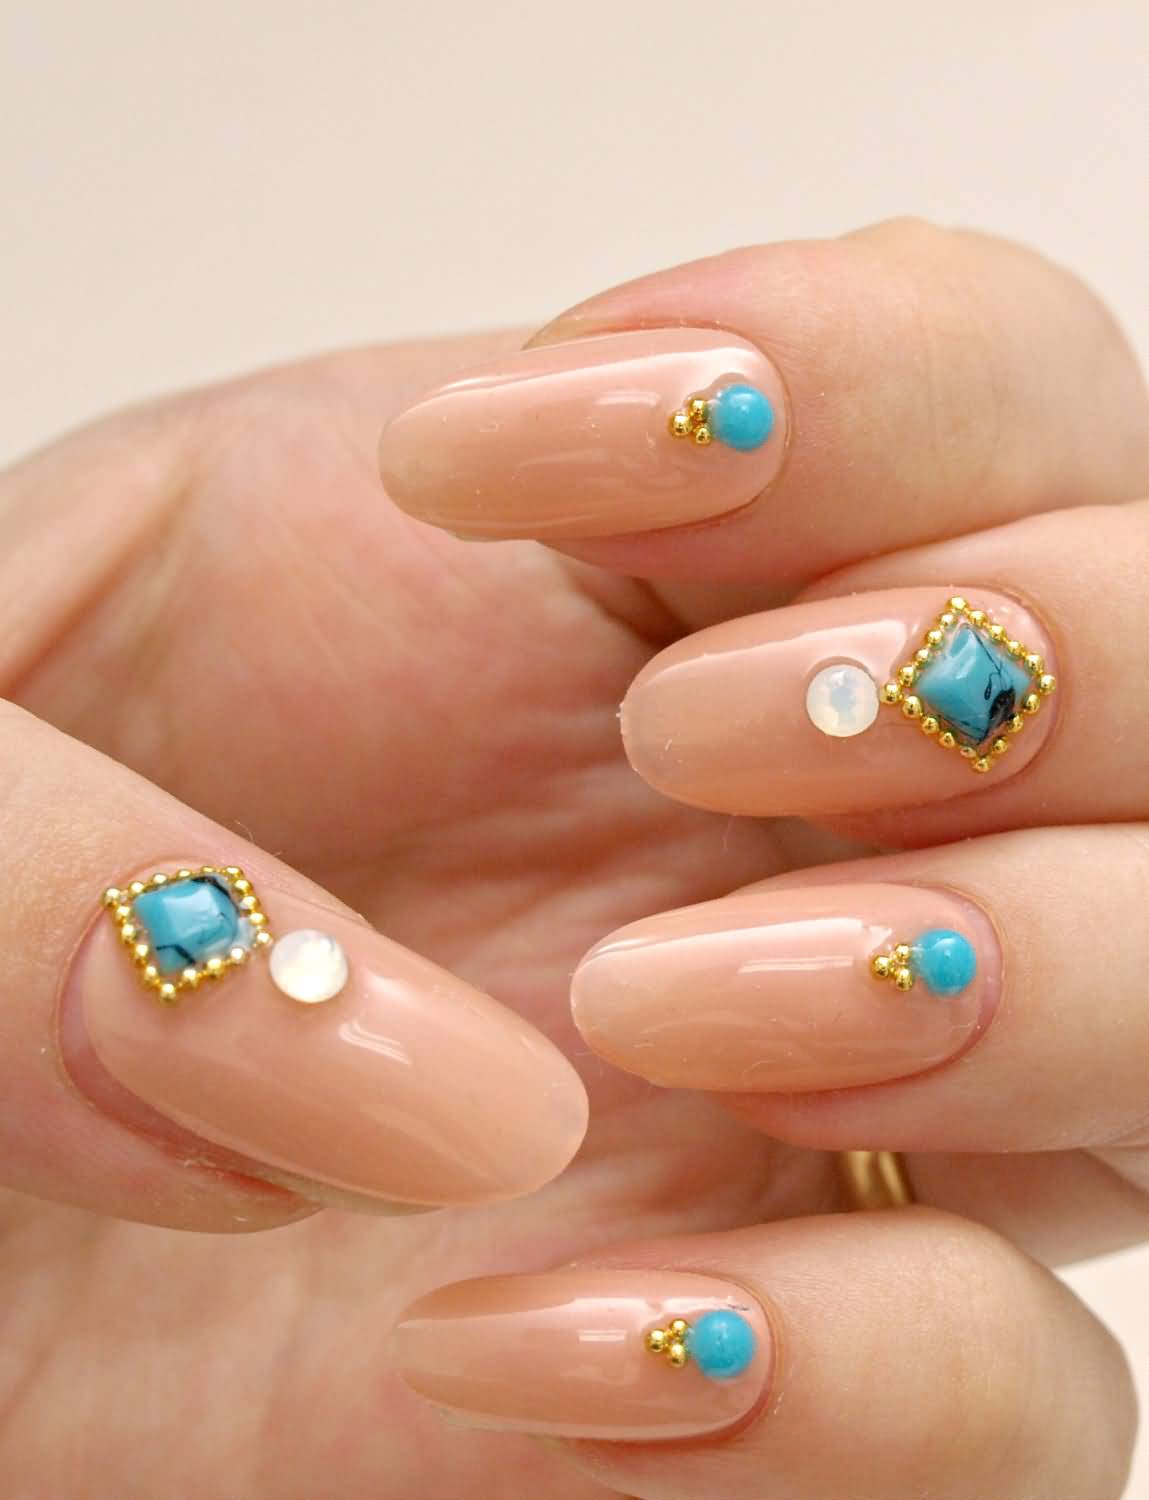 Beige Nails With Gems Nail Art